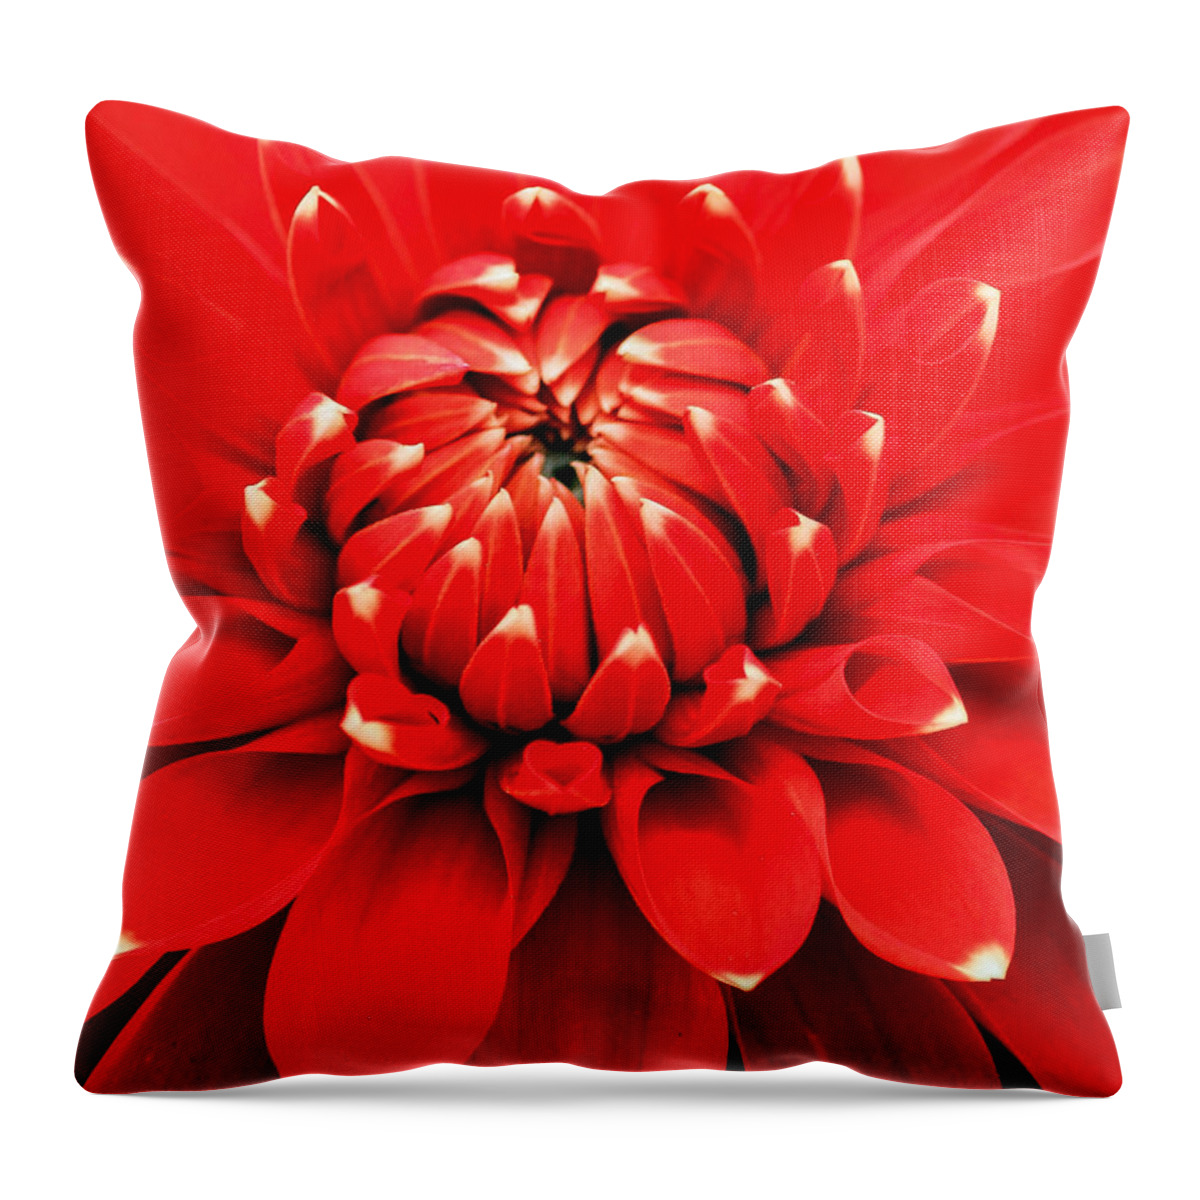 Dahlia In Bloom Throw Pillow featuring the photograph Red Dahlia with White Tips by E Faithe Lester